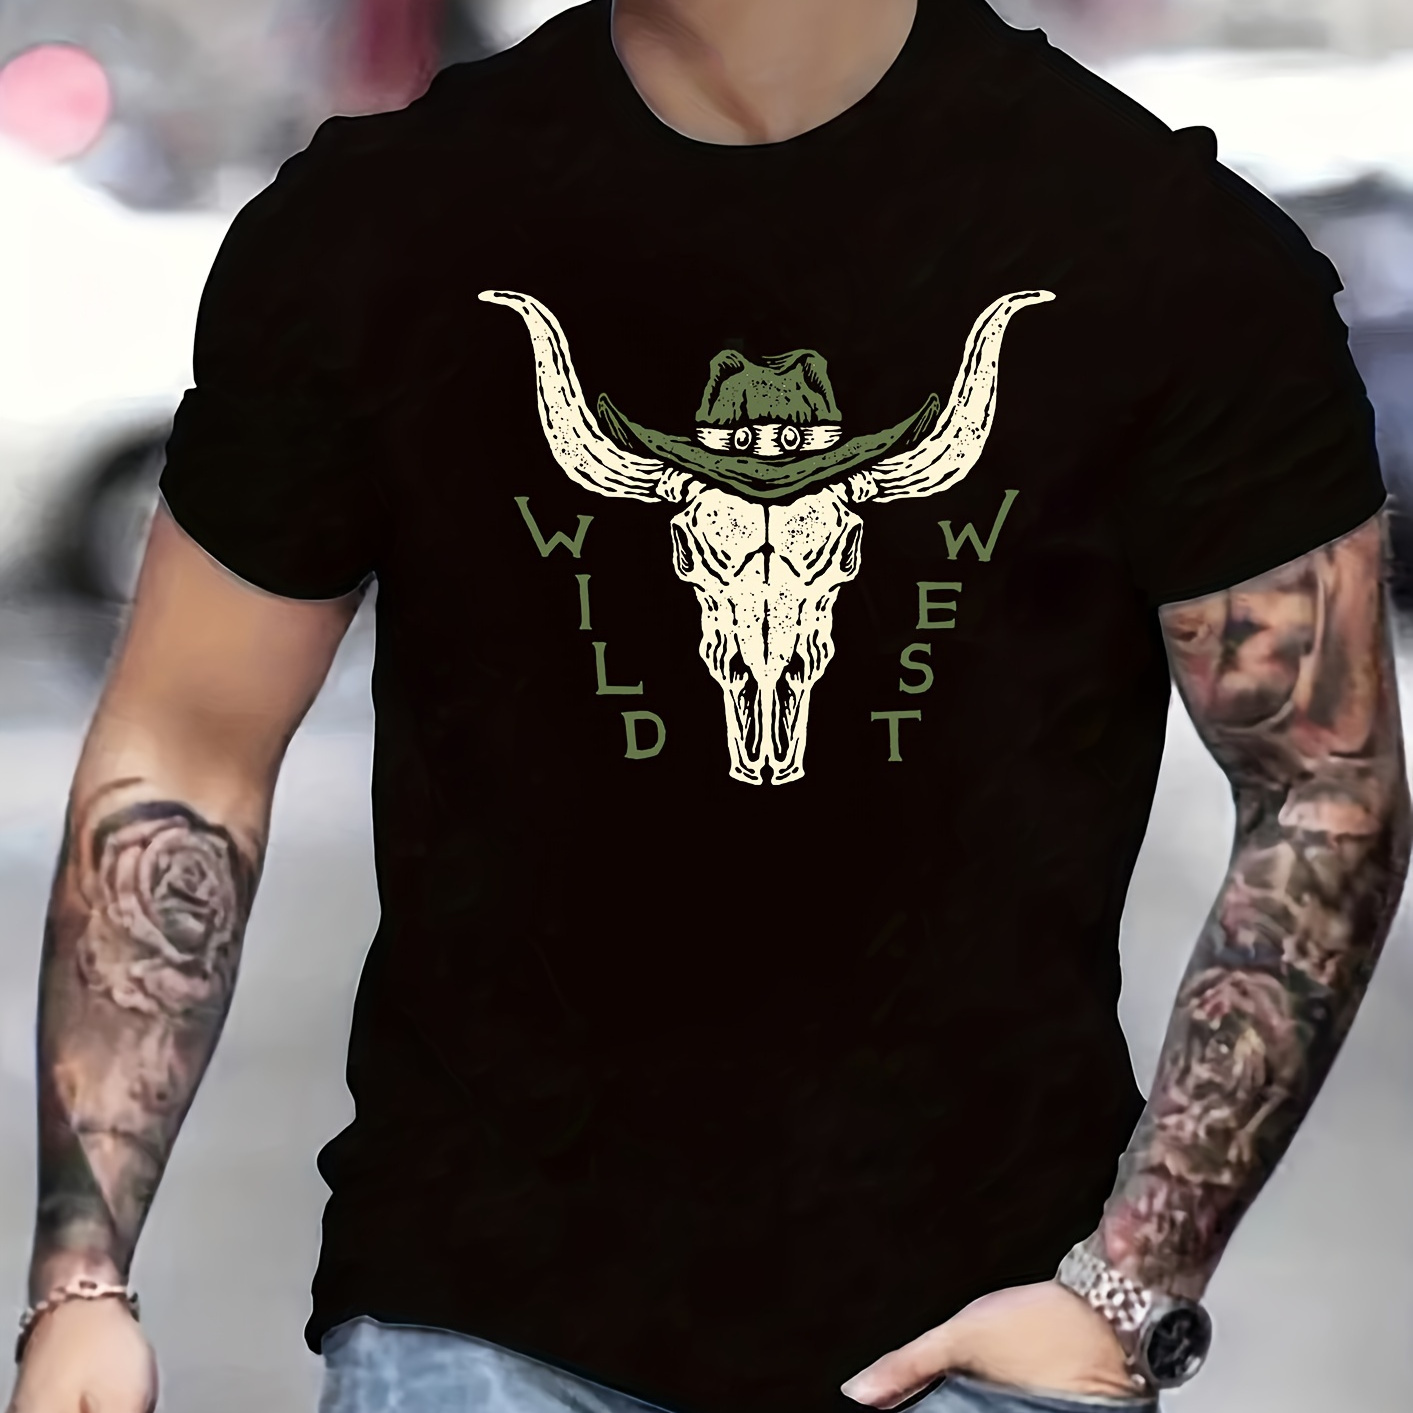 

Wild West Print T Shirt, Tees For Men, Casual Short Sleeve T-shirt For Summer